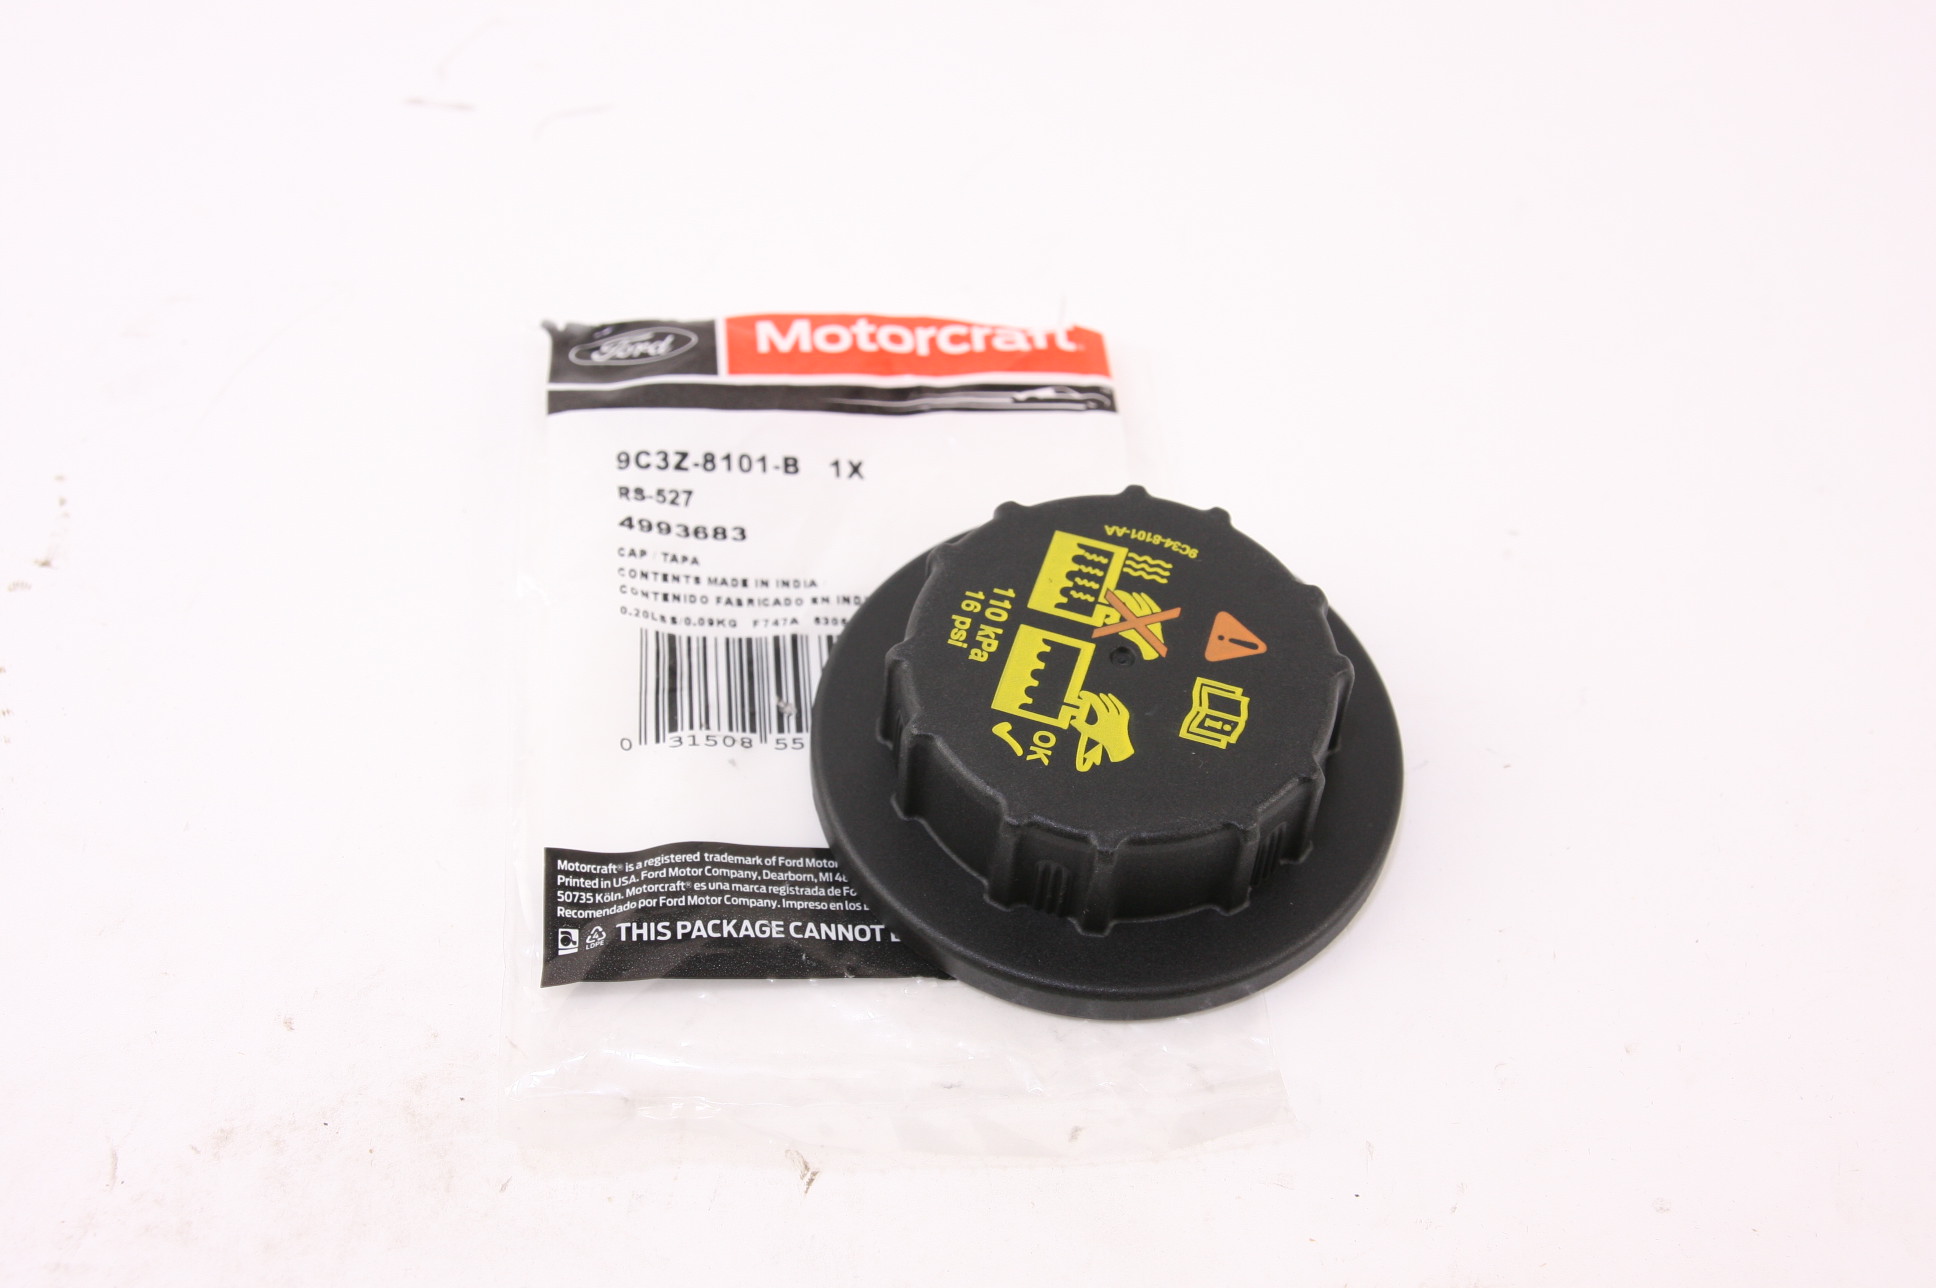 New OEM Motorcraft Ford Lincoln Mercury Radiator Coolant Recovery Tank Cap RS527 - image 1